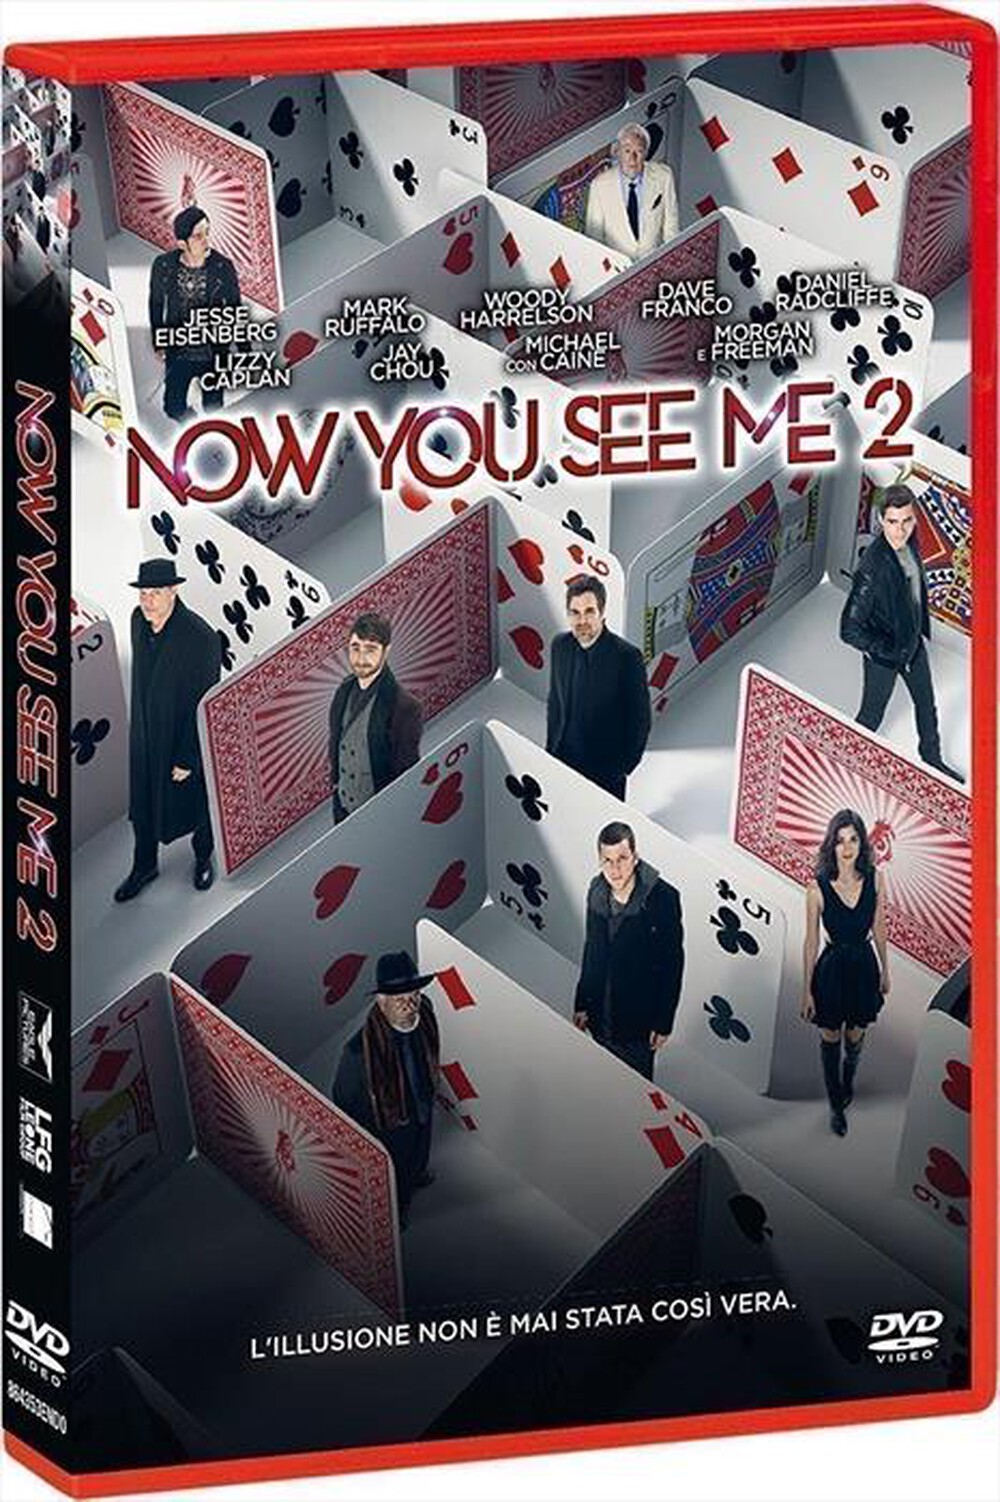 "EAGLE PICTURES - Now You See Me 2"